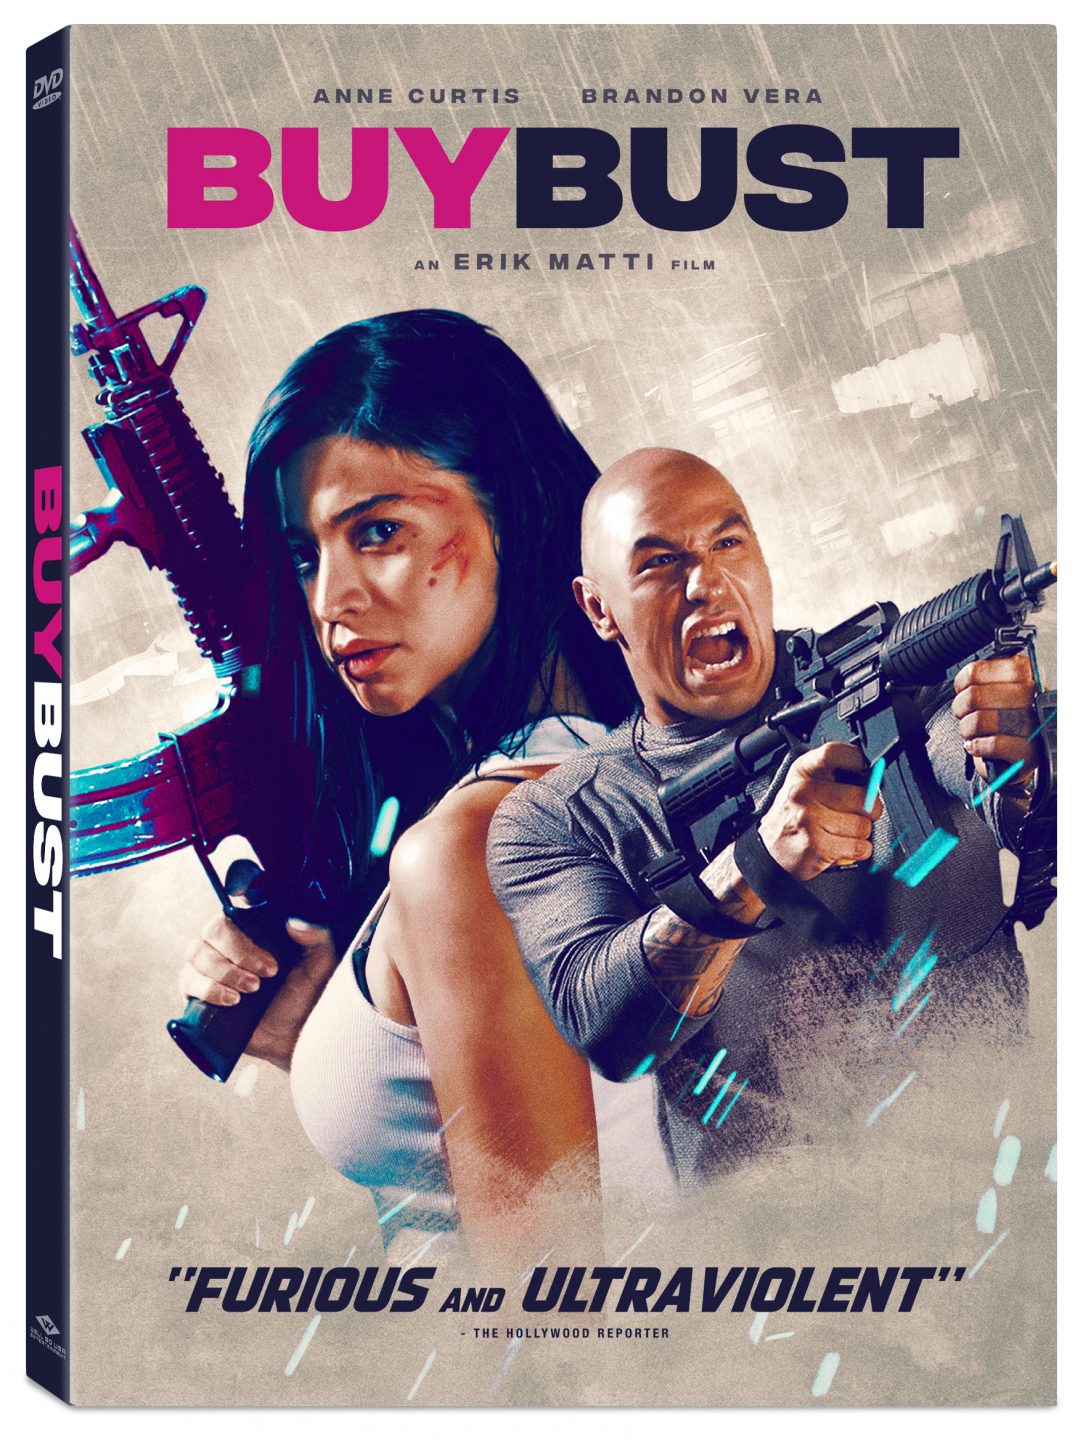 BuyBust DVD cover (Well Go USA Entertainment)